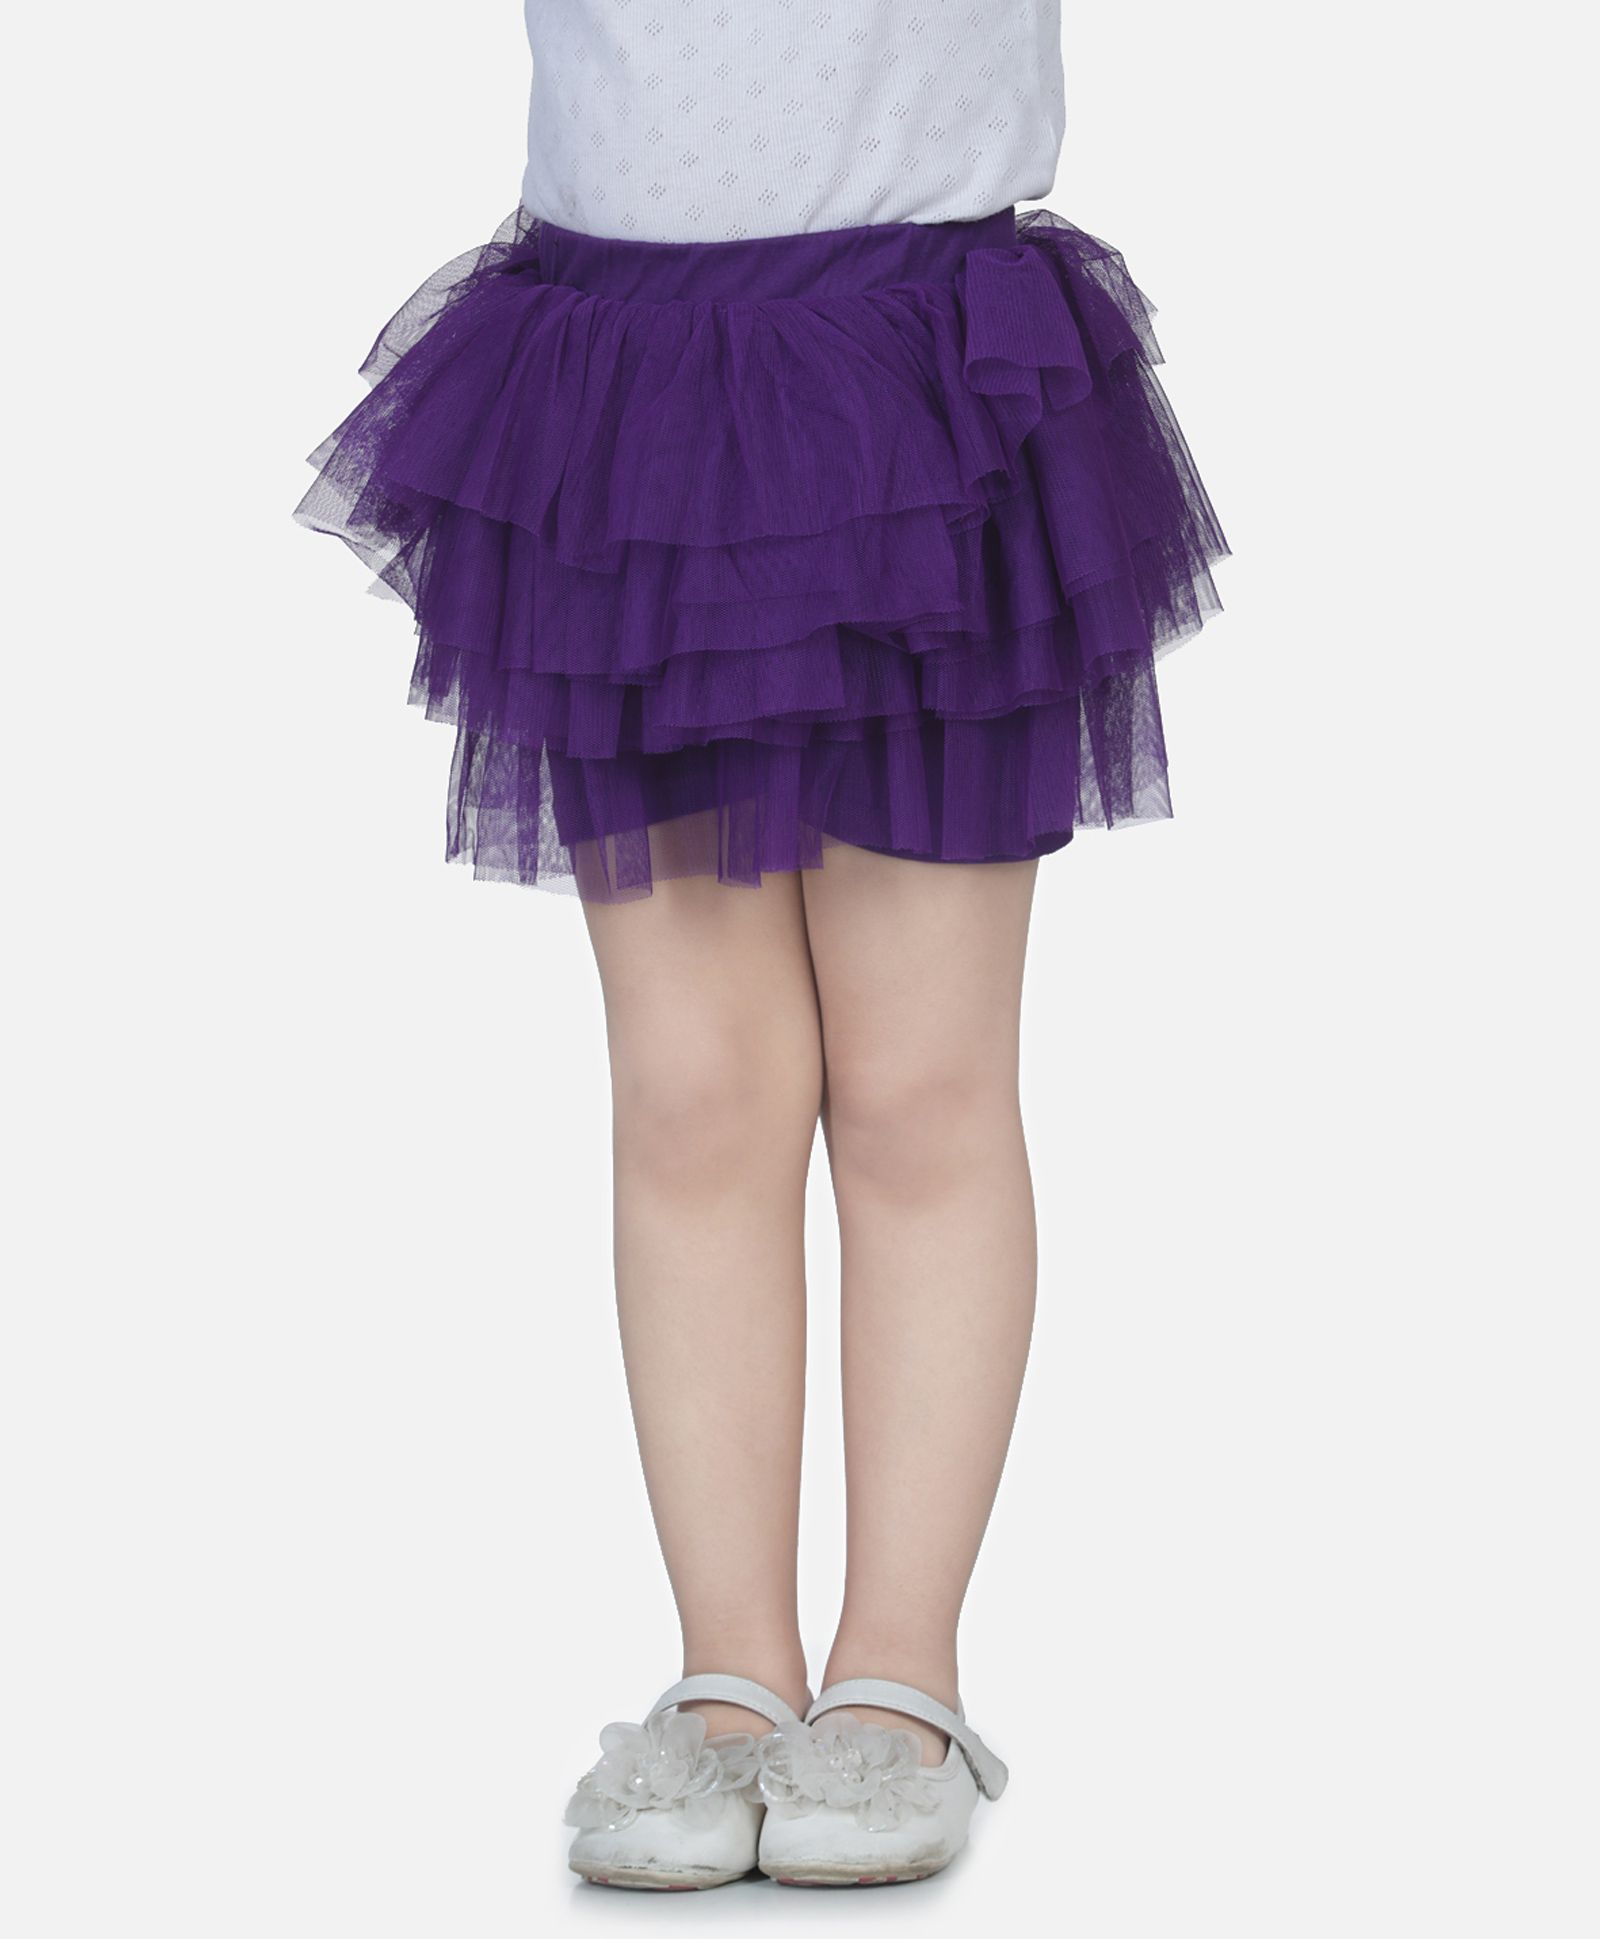 Buy Aww Hunnie Tutu Skirt With Attached 